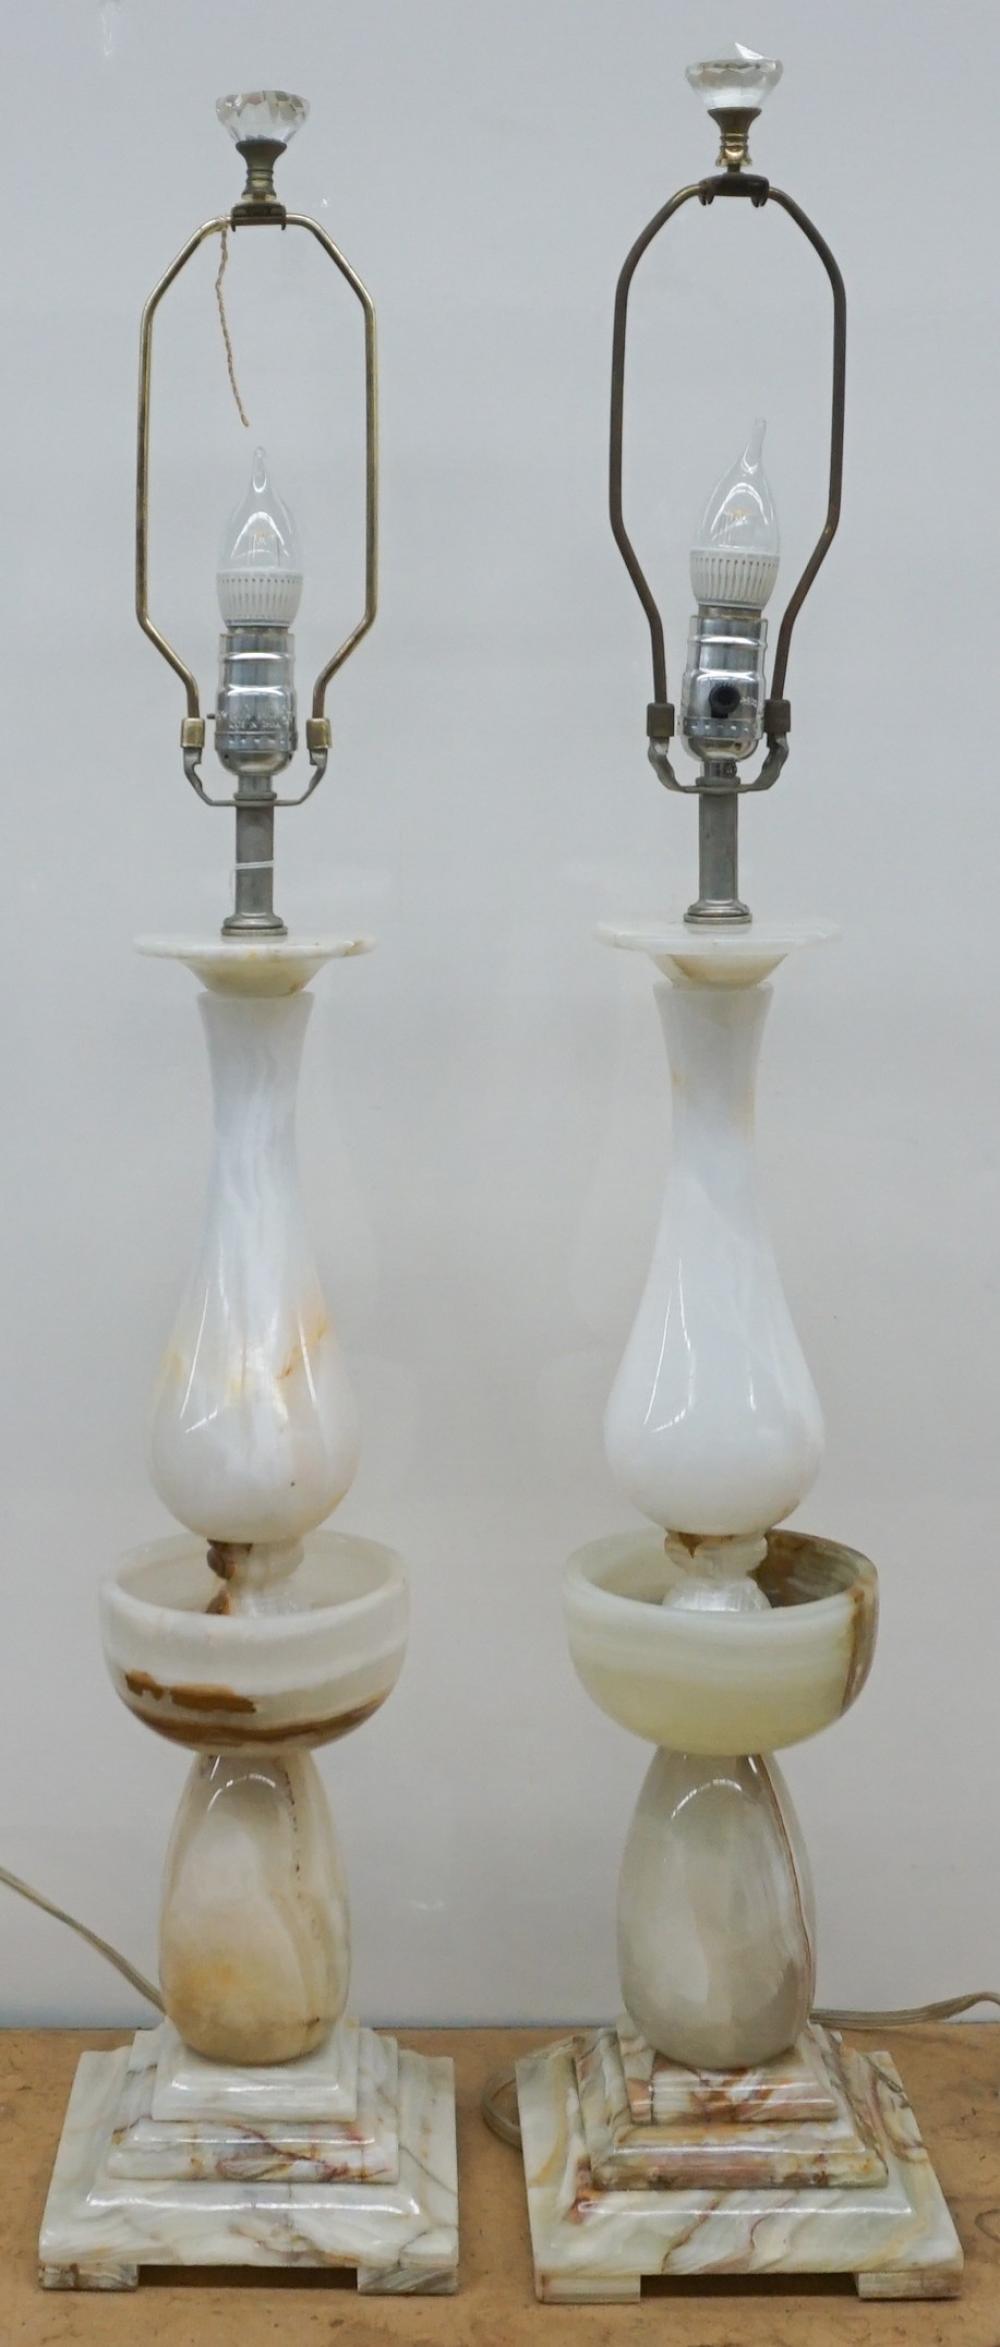 PAIR ONYX TABLE LAMPS, H: 35 IN. (88.90